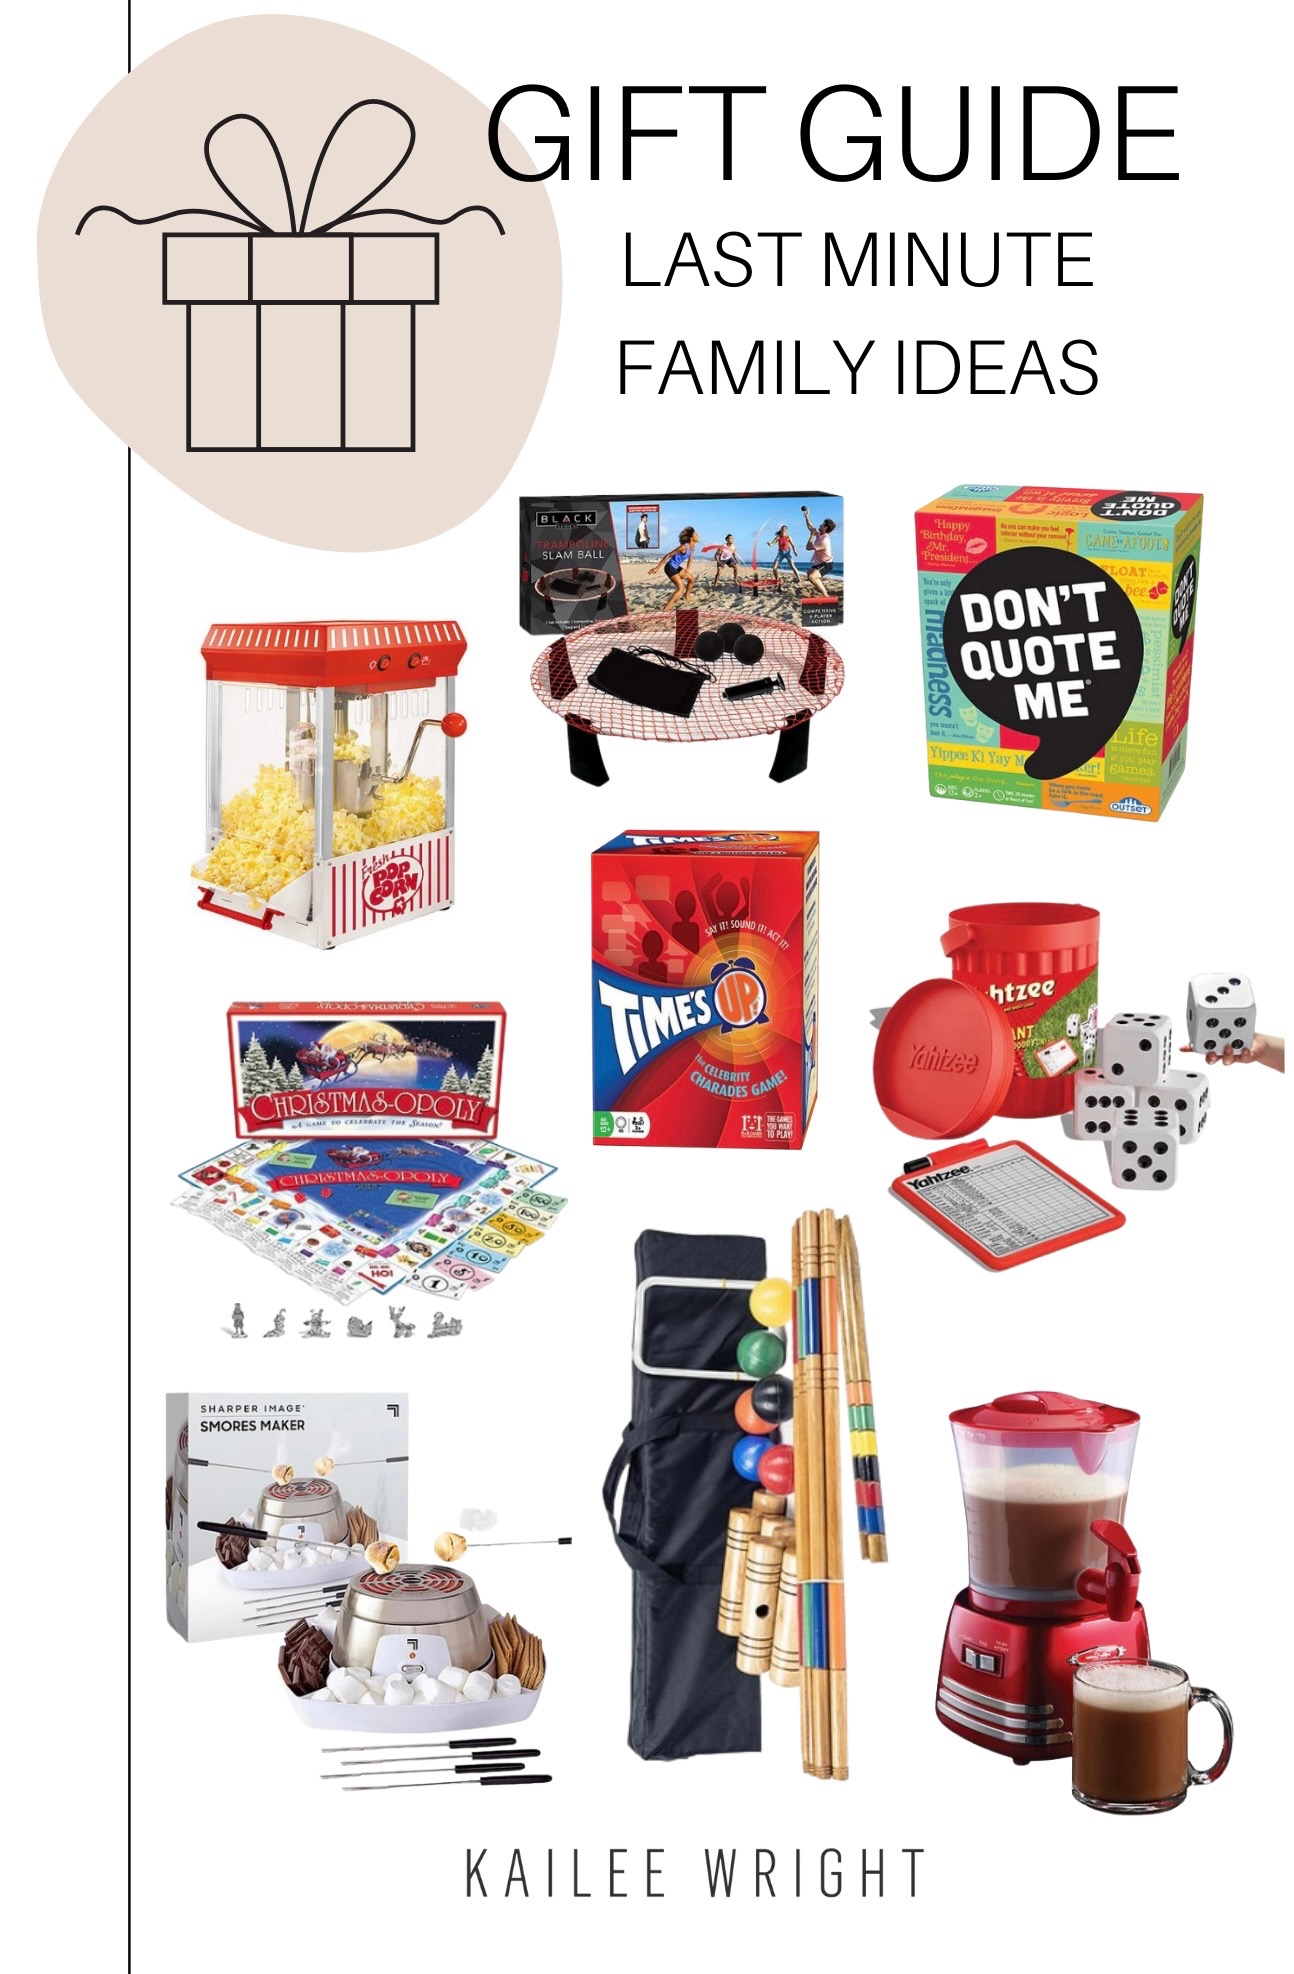 Last Minute Family Gift Ideas - Kailee Wright